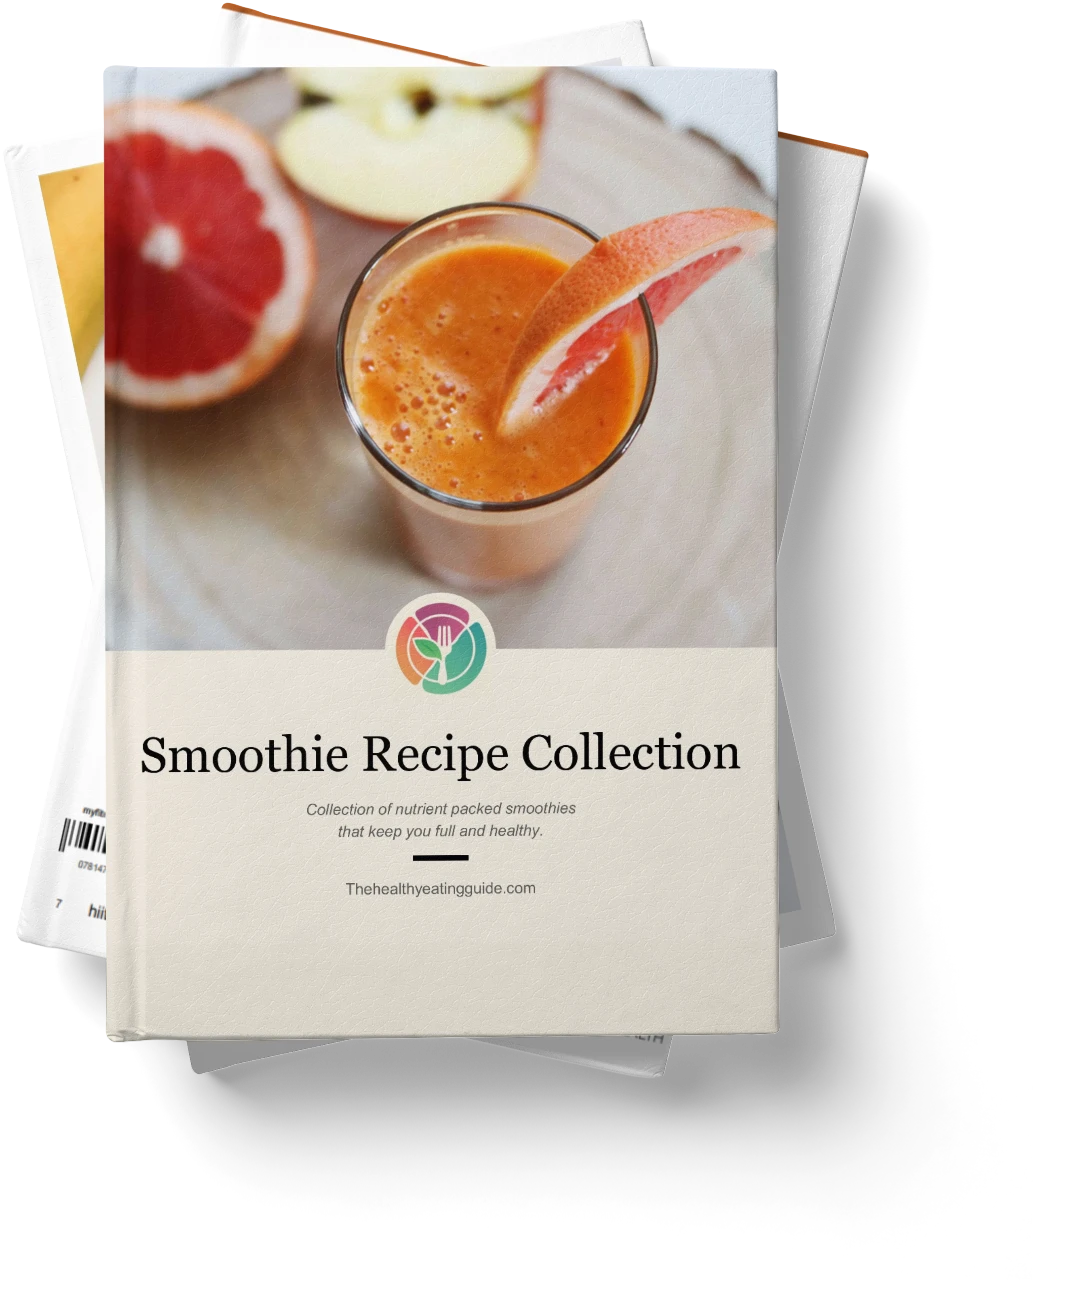 Smoothie Recipe Pack hard cover book stack